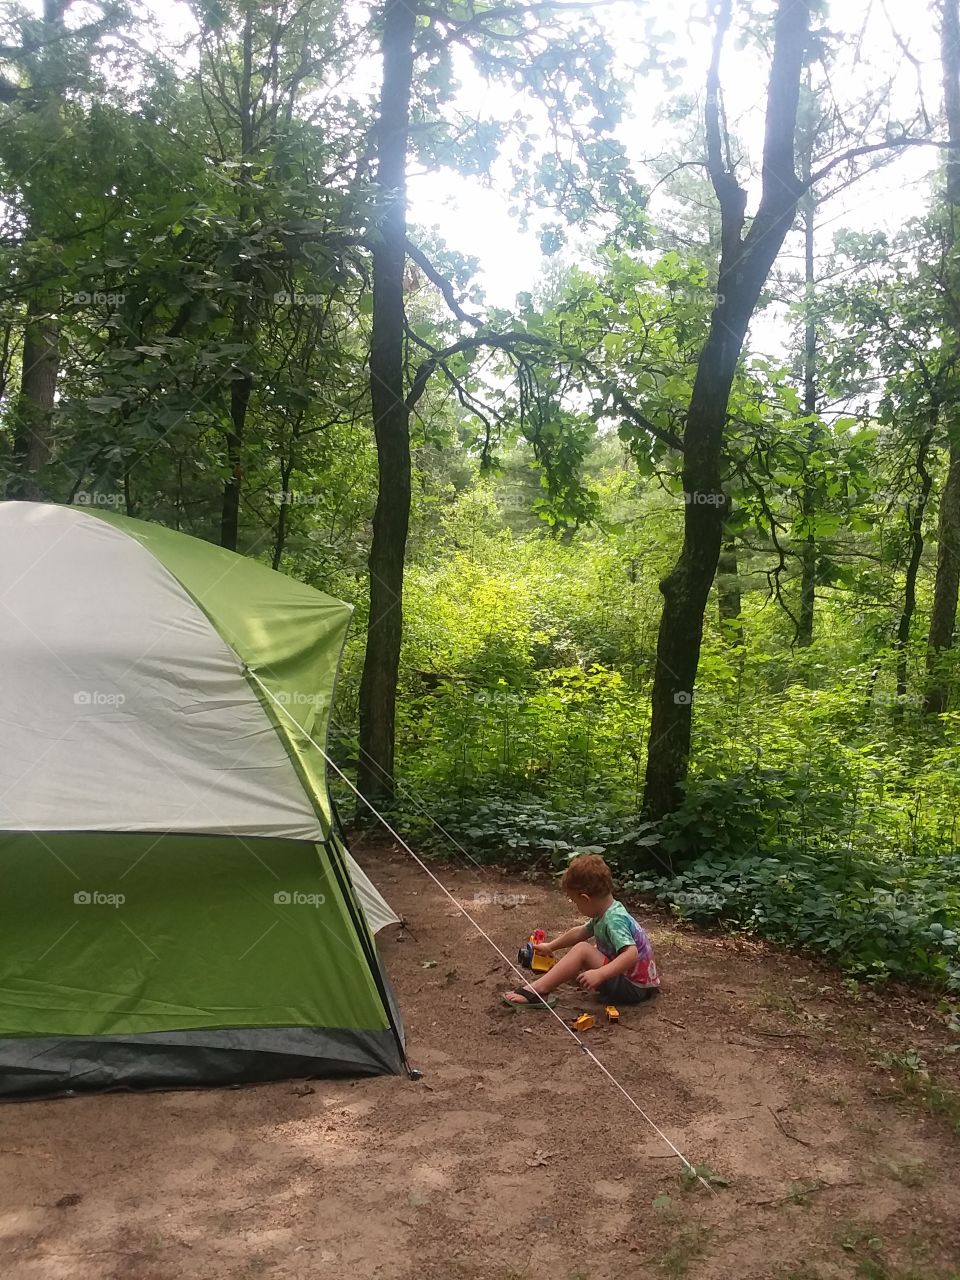 Vacation Camping Boy Playing by Tent